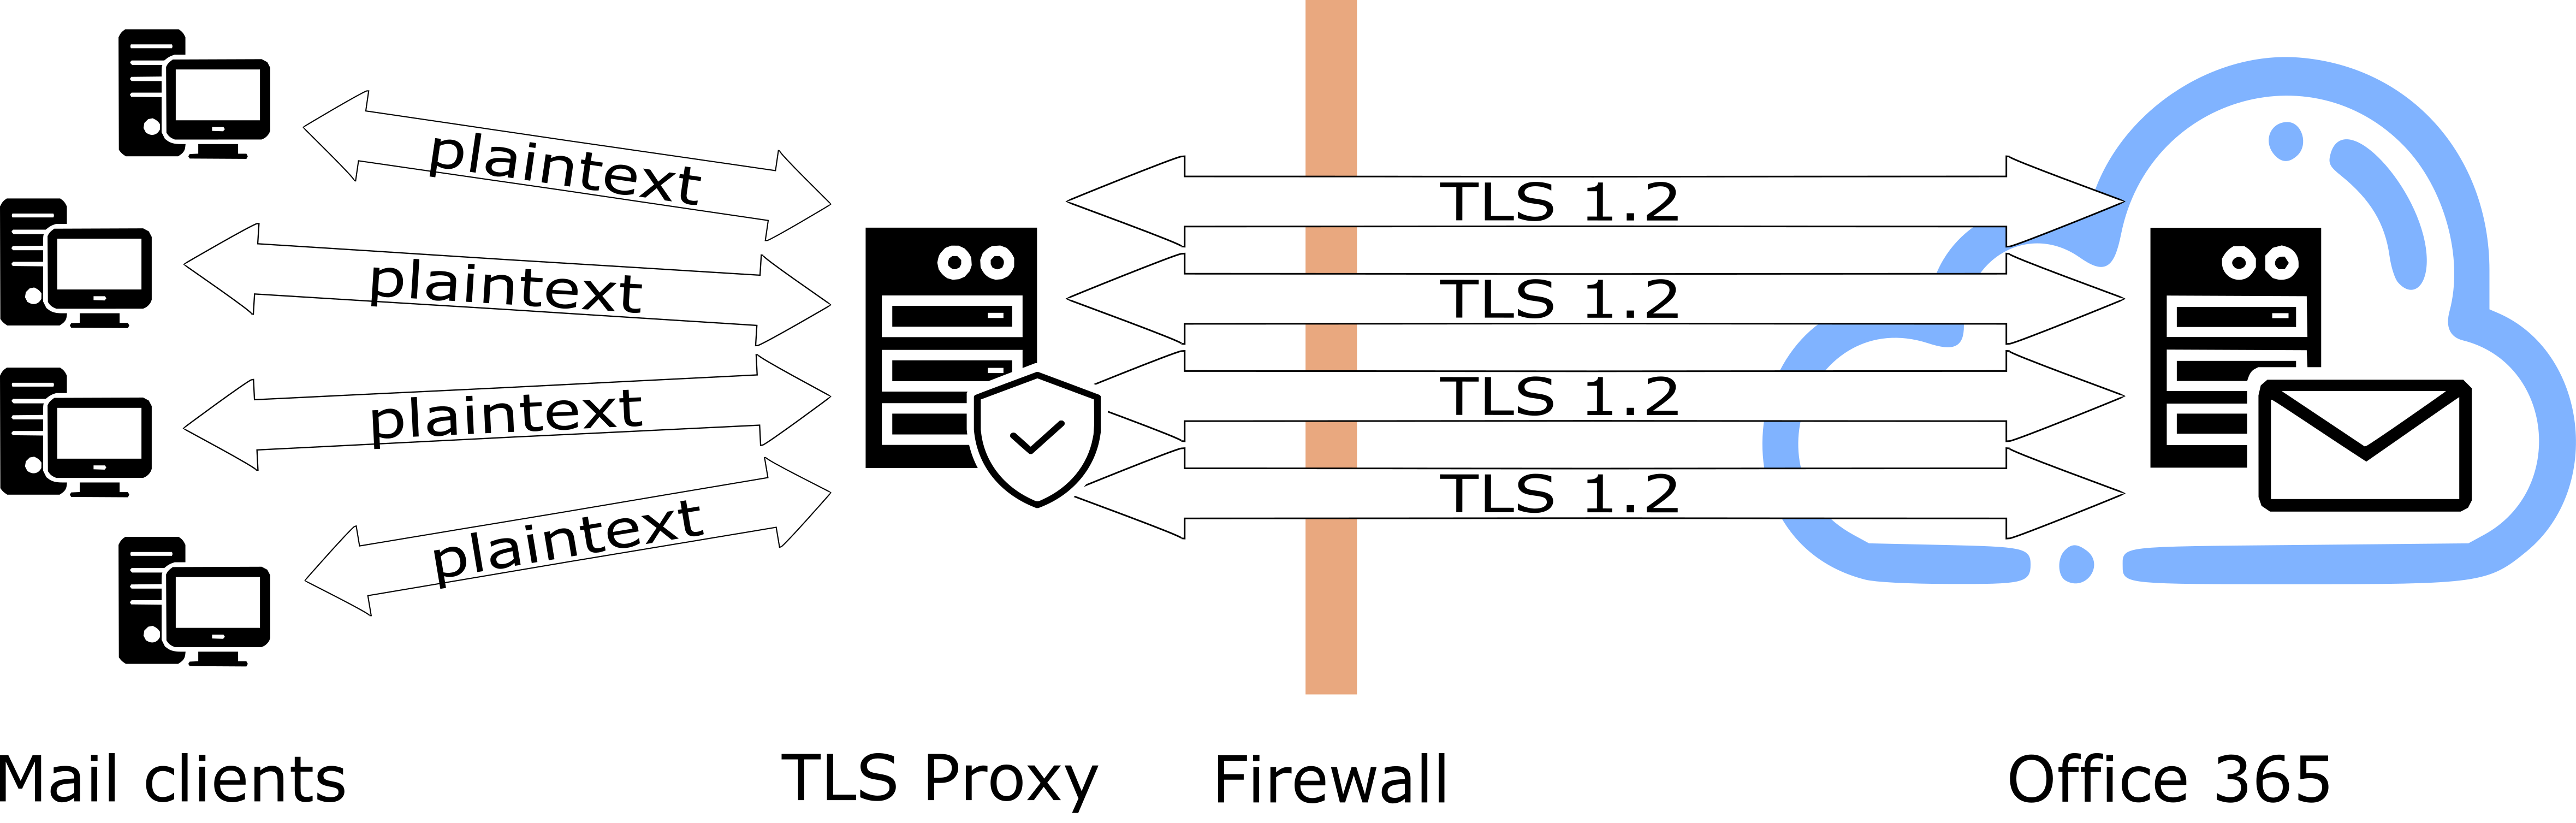 Architecture of connecting legacy mail clients to a modern mail server with Rebex TLS Proxy